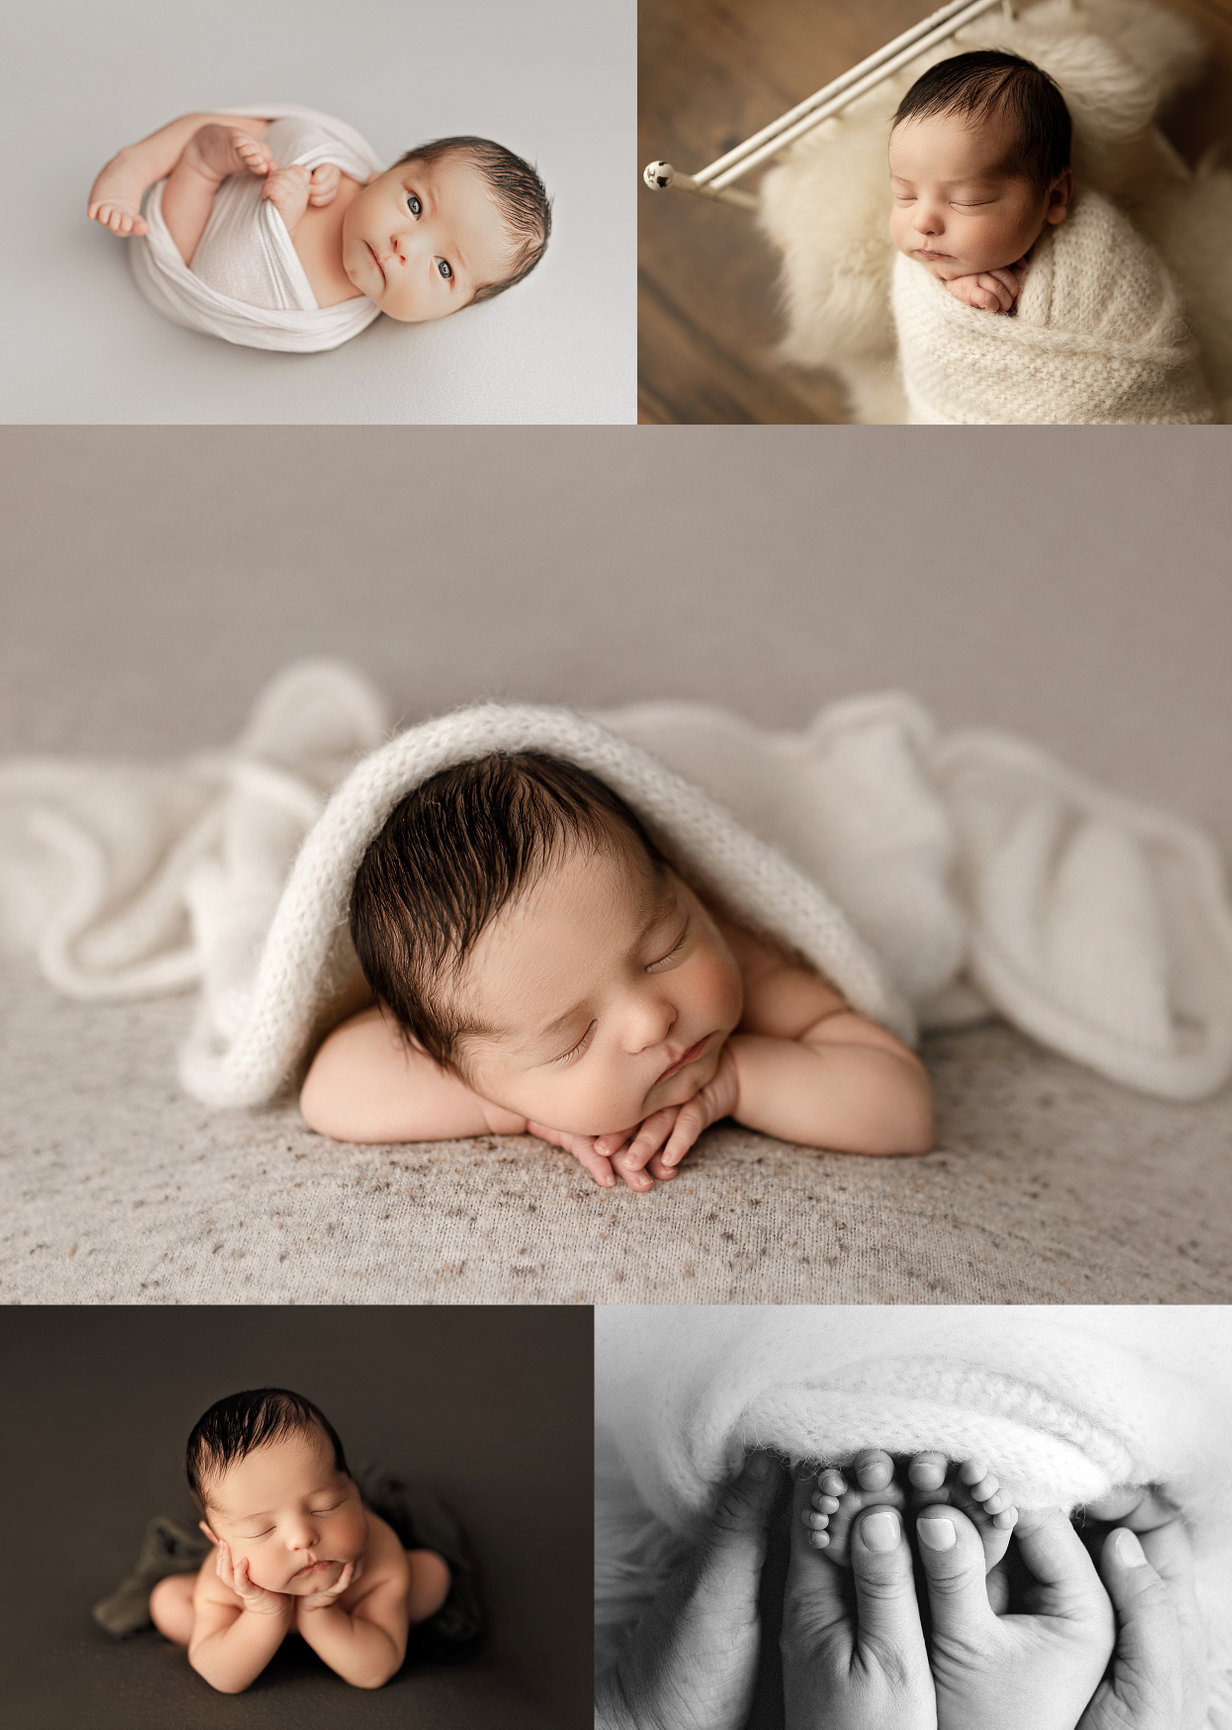 Top 16 Baby Photoshoot Ideas at Home for a Girl & Boy